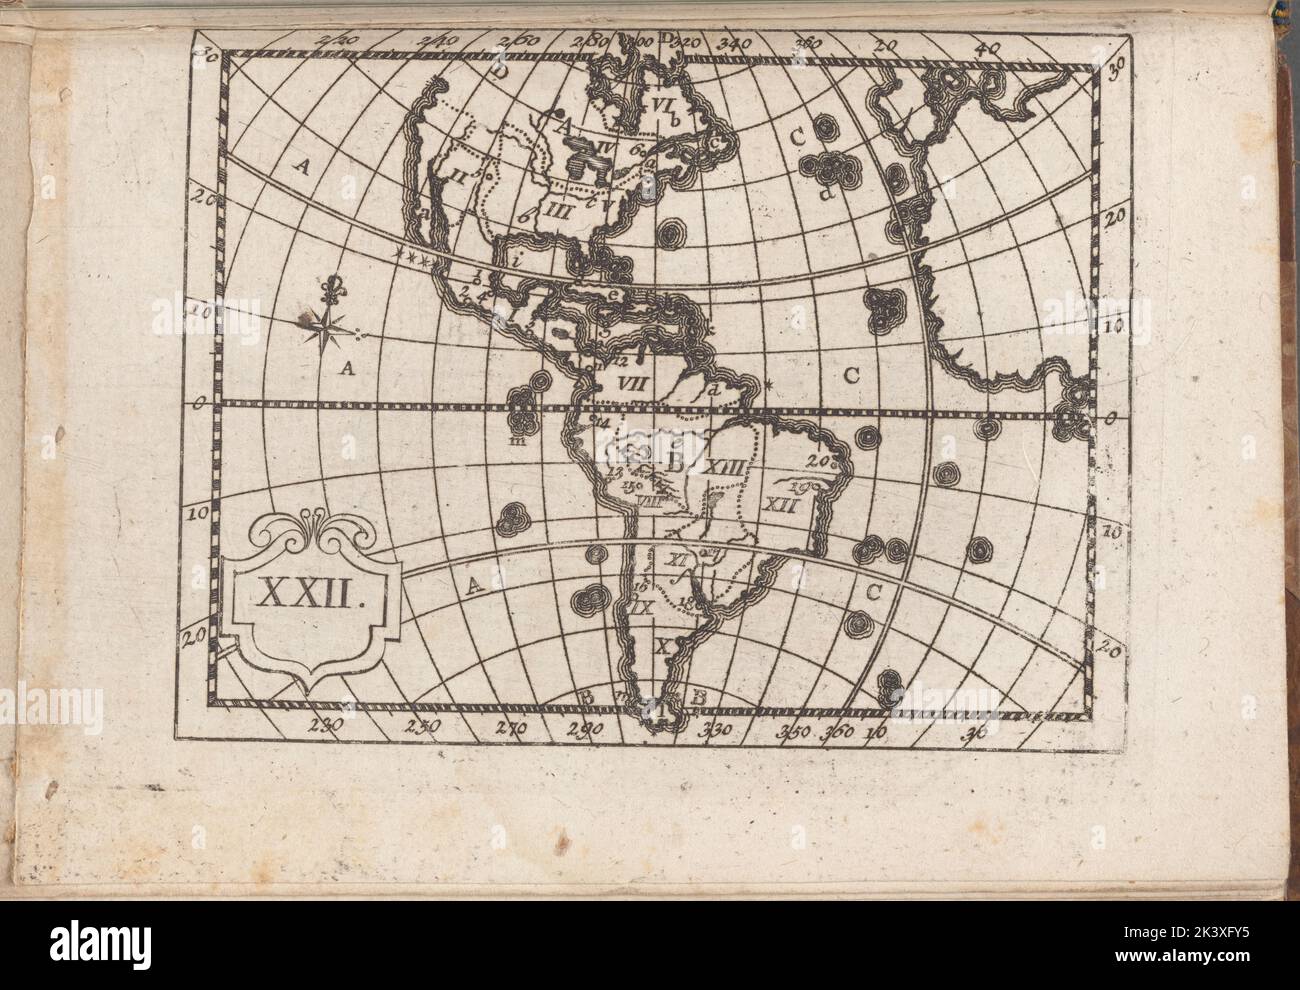 Atlas des enfans..., XXII Dilthey, Philipp Heinrich, 1723-1781. Cartographic. Maps. 1768. Rare Book Division. Geography Stock Photo